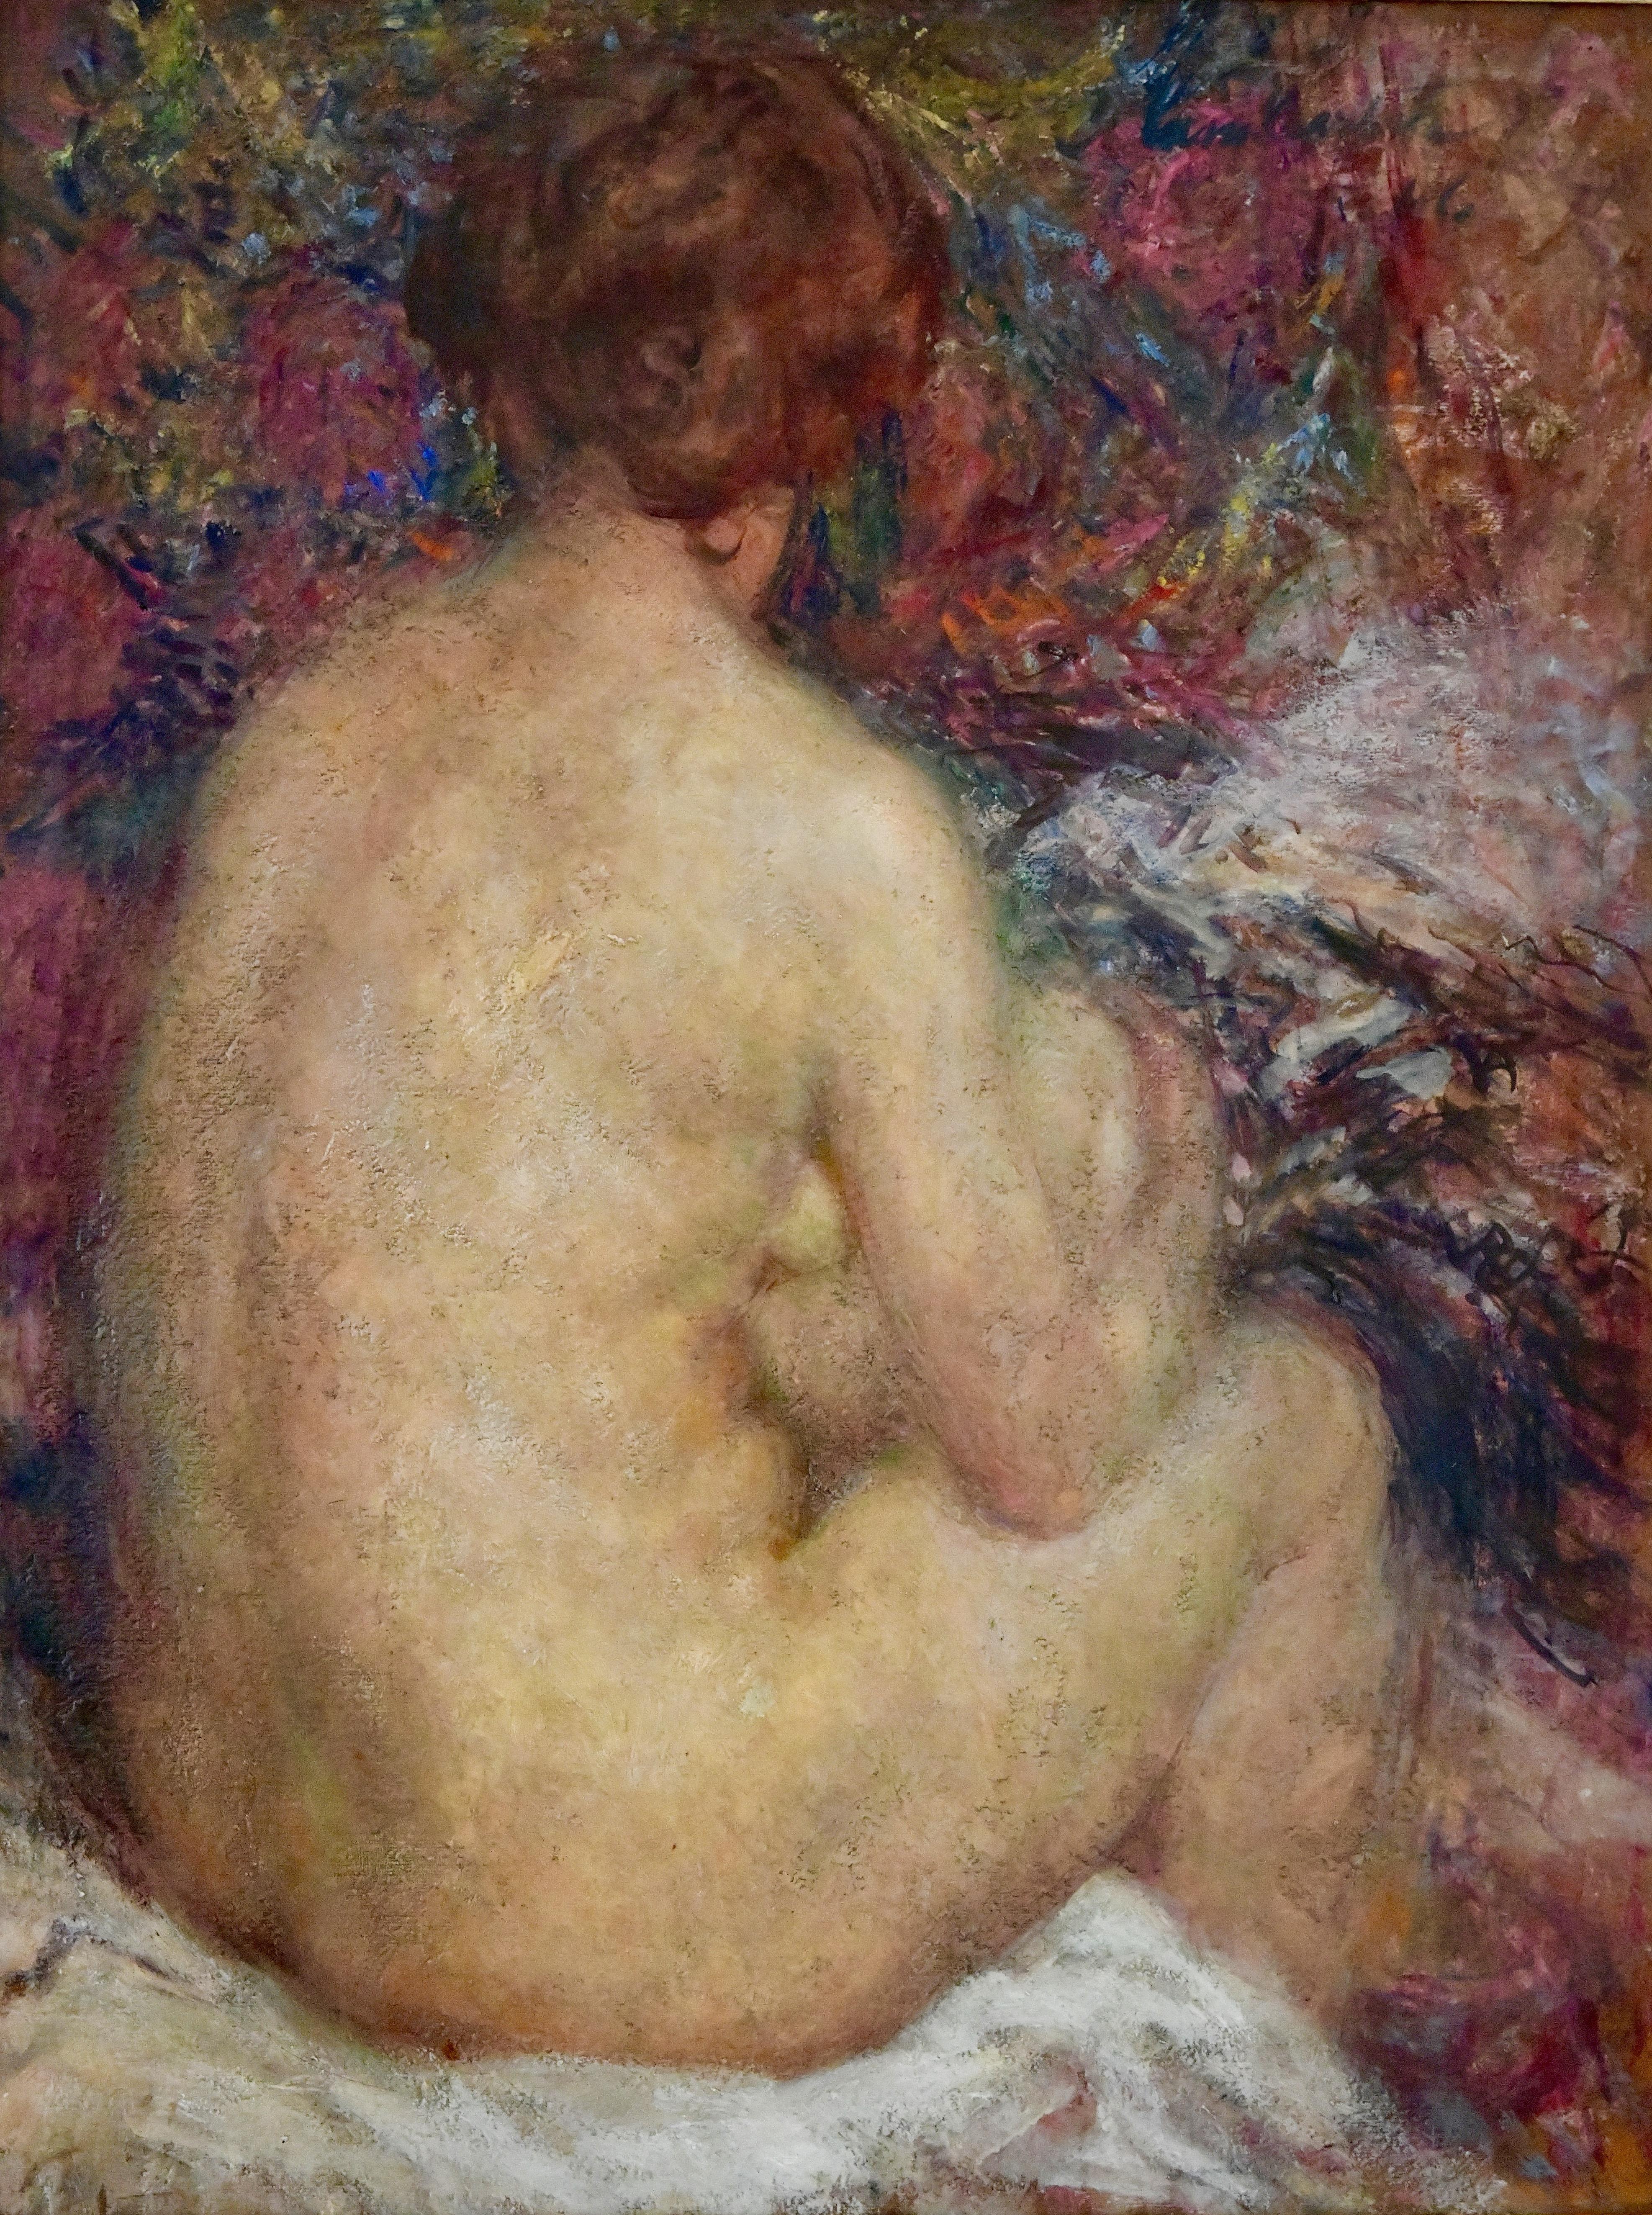 Impressionist painting of a seated nude by Joseph Louis Lamberton 1867-1943. Oil on board. 
Original gilt wood frame. 
France 1906. 
Size framed: 
H. 82 cm x L. 67 cm x D. 4.5 cm 
H. 32. Inch x L. 26.4 inch x D. 1.8 inch. 
Size of the